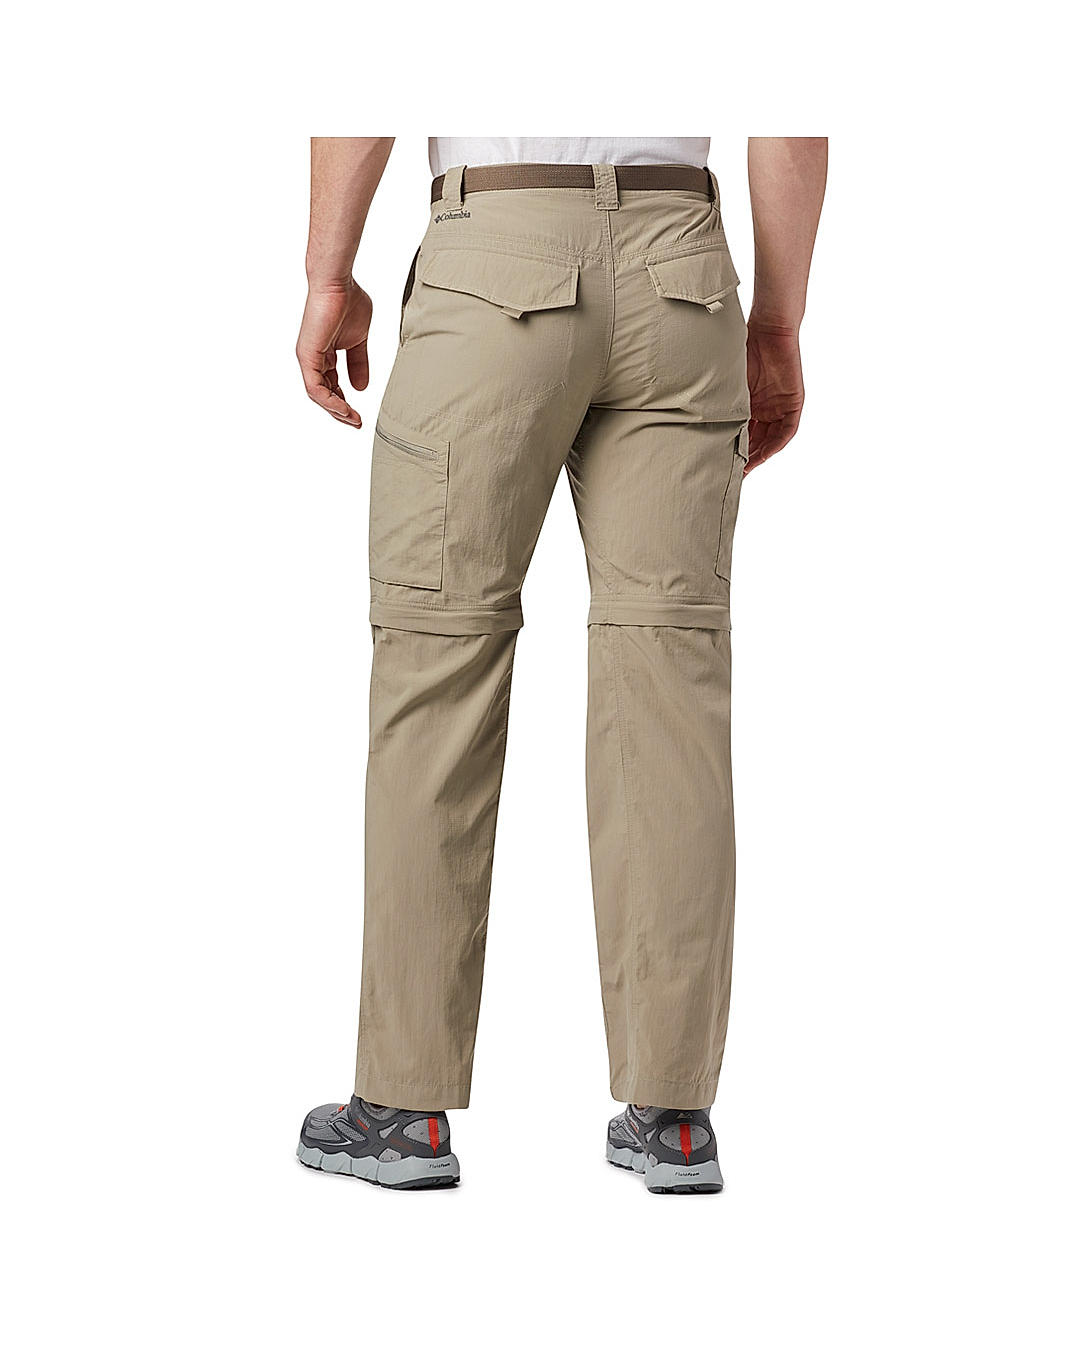 Columbia  Zip Off Trousers Mens  Grill  House of Fraser